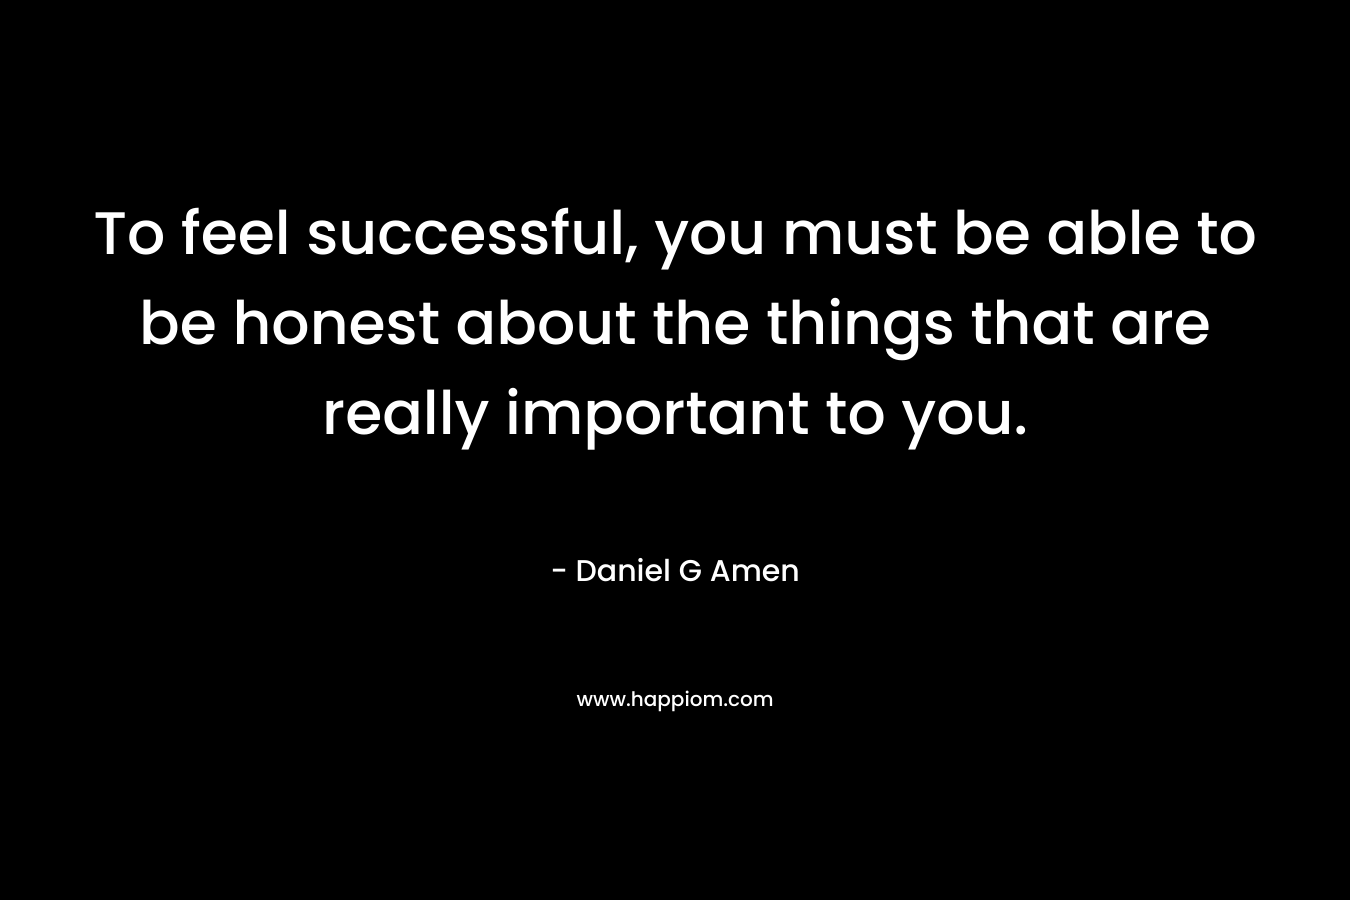 To feel successful, you must be able to be honest about the things that are really important to you.